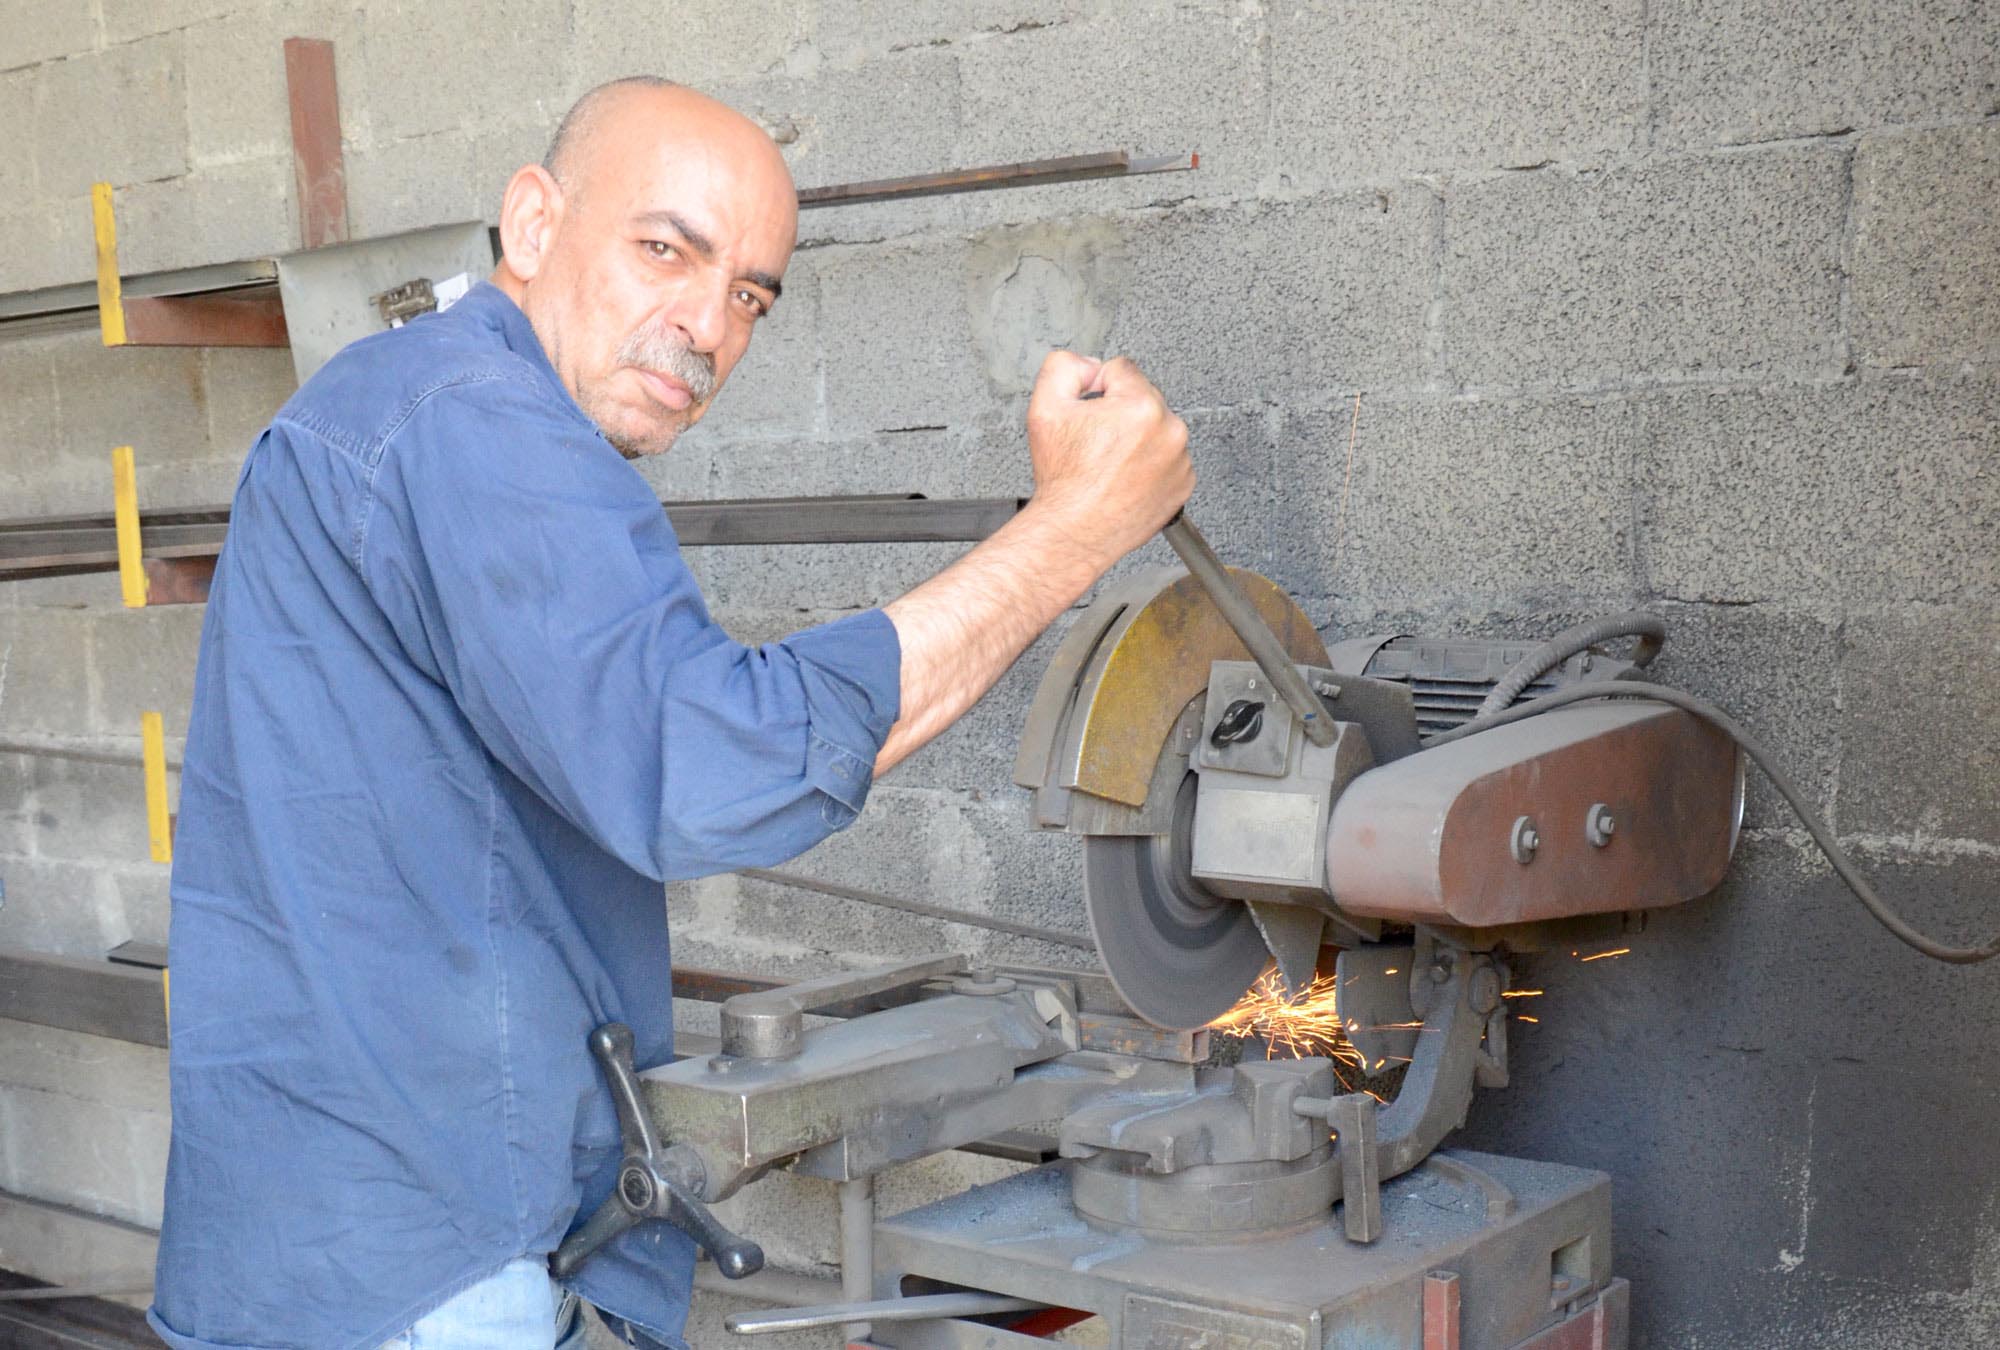 Jousef is one of the original business owners who opened up after Anera built the industrial complex in the 1980s.